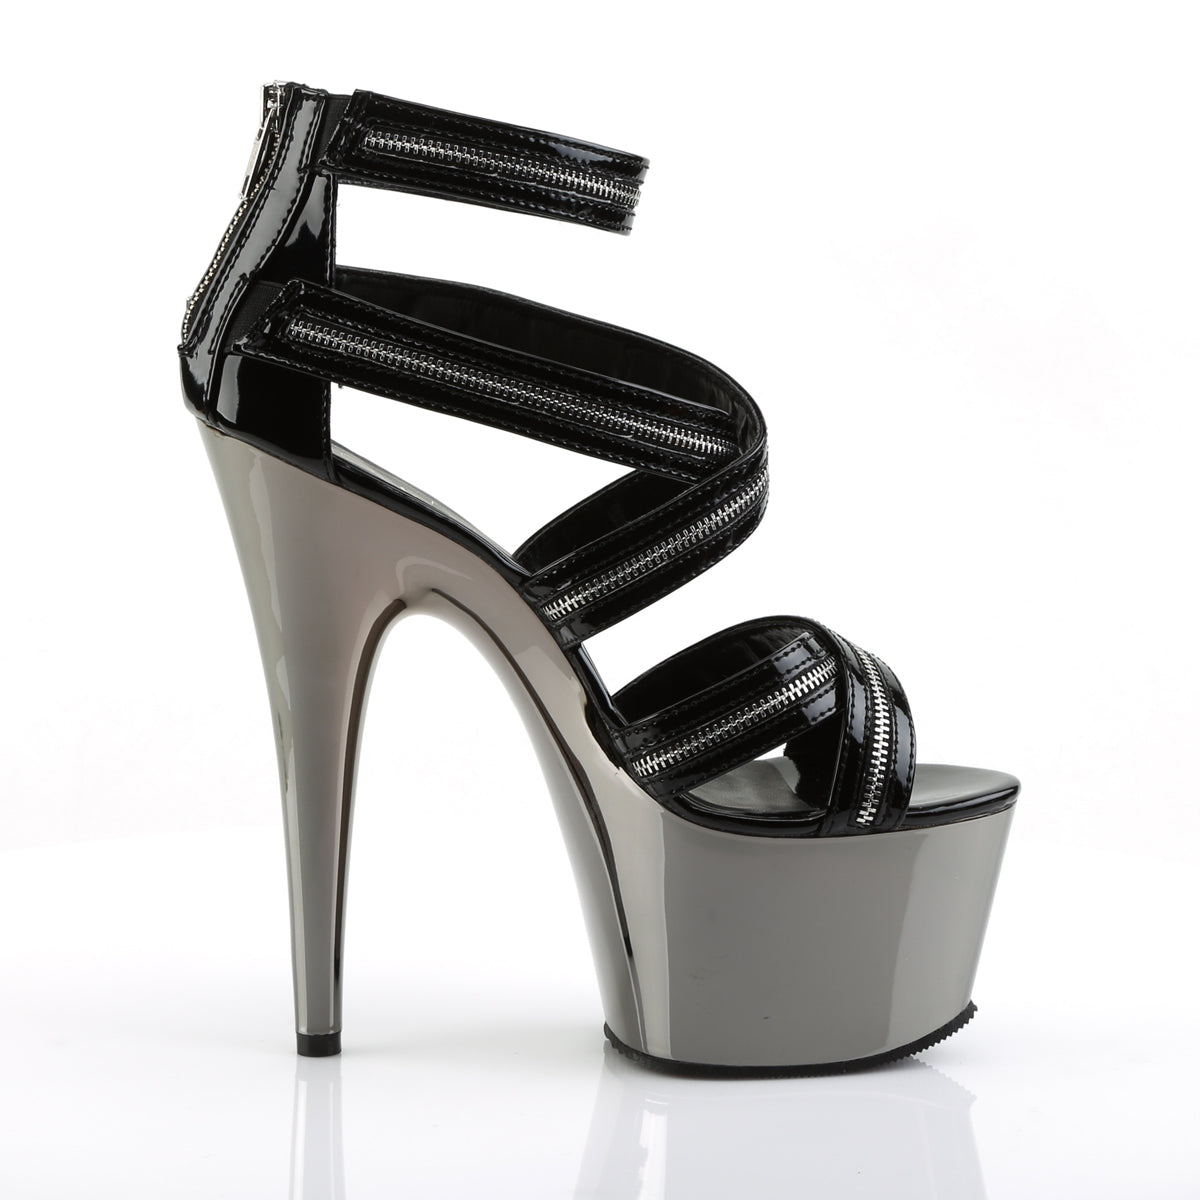 ADORE-767 7" Heel Black and Pewter Chrome Strippers Sandals-Pleaser- Sexy Shoes Fetish Heels